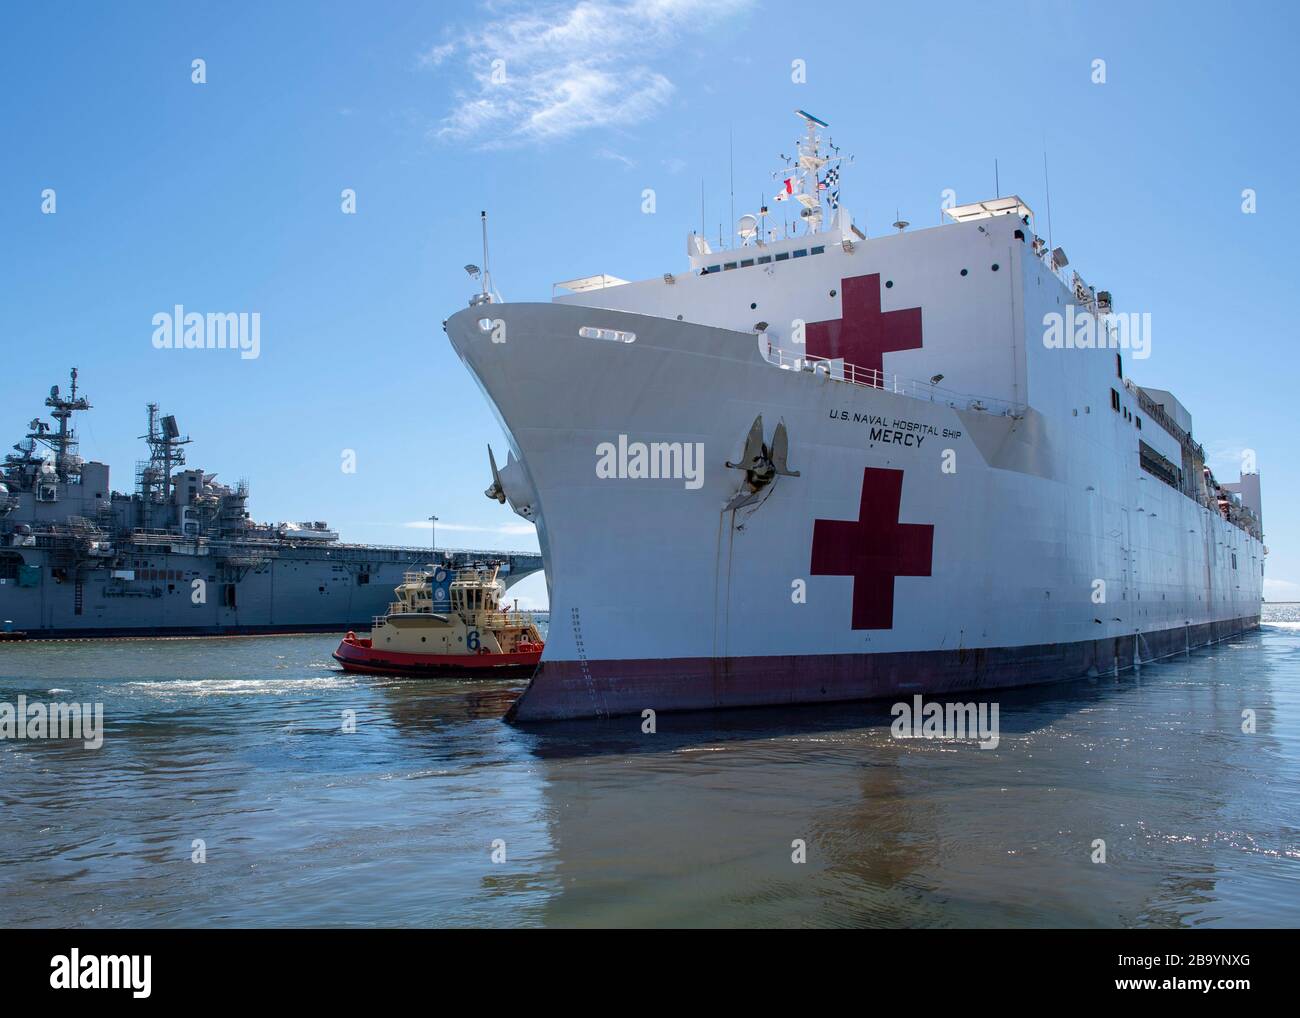 The U.S. Navy Military Sealift Command hospital ship USNS Mercy navigates the San Diego channel as it heads out for deployment to assist in the COVID-19, coronavirus response March 23, 2020 in San Diego, California. Stock Photo